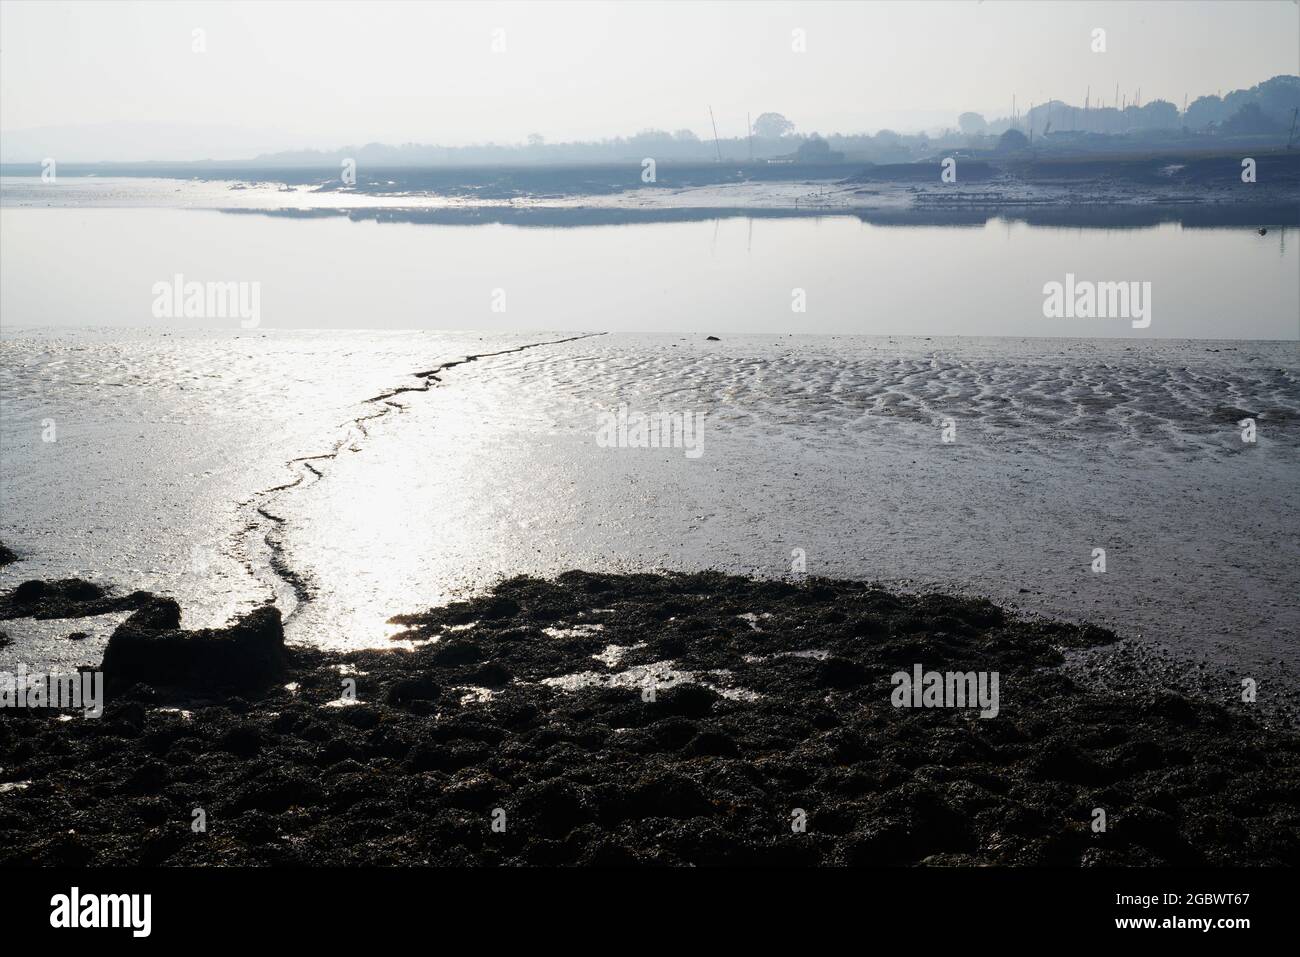 MUDDY BANKS OF THE RIVER CROUCH AND THE TRAILS OF WATER CUTTING THROUGH THE MUD, SILVER AND SHIMMERING IN THE EARLY MORNING SUNLIGHT, Stock Photo